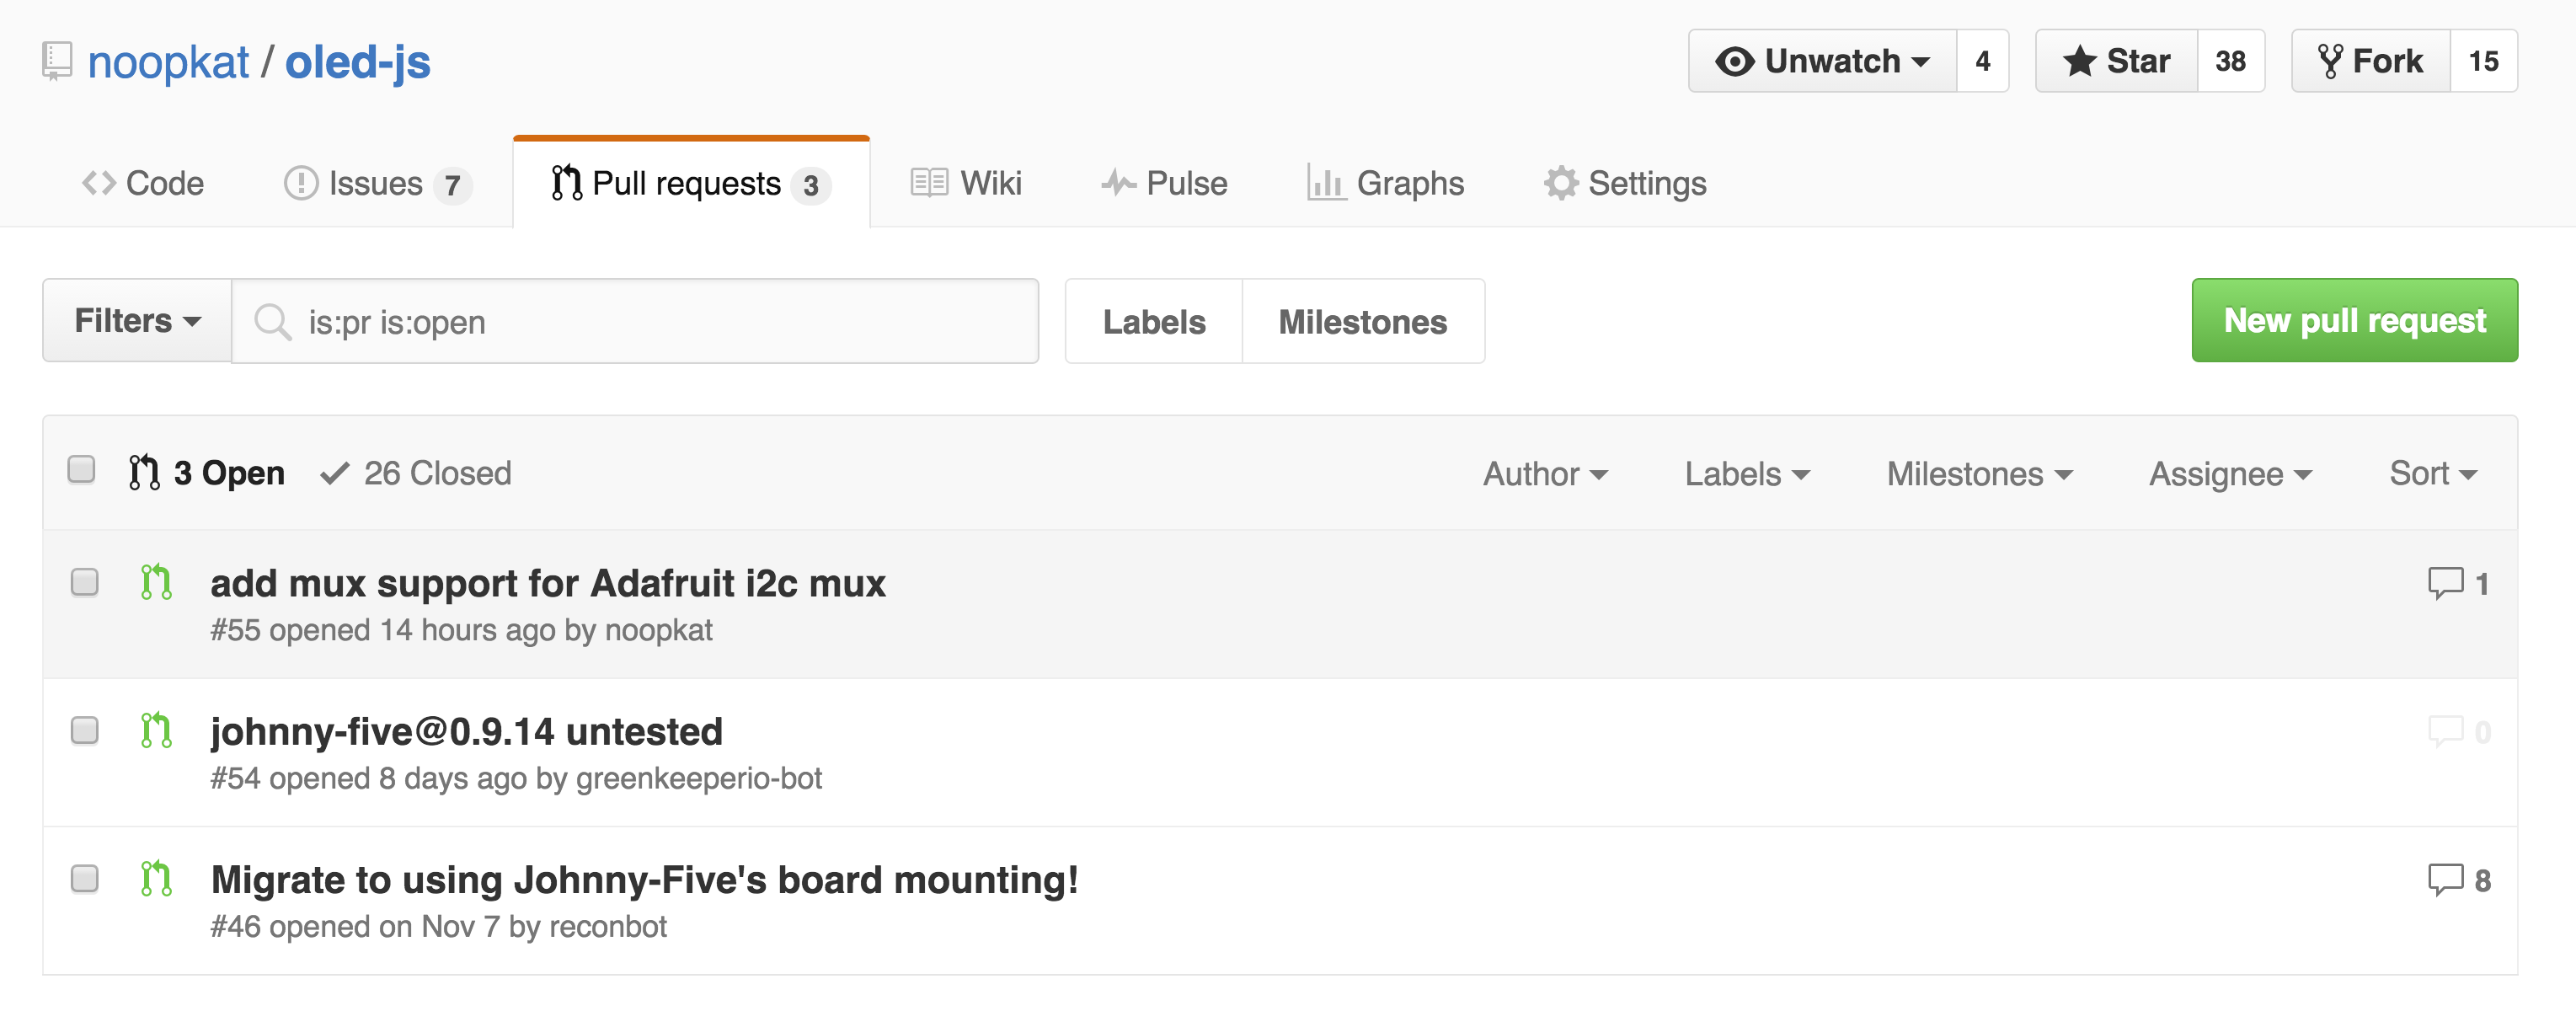 github screenshot of some pull requests